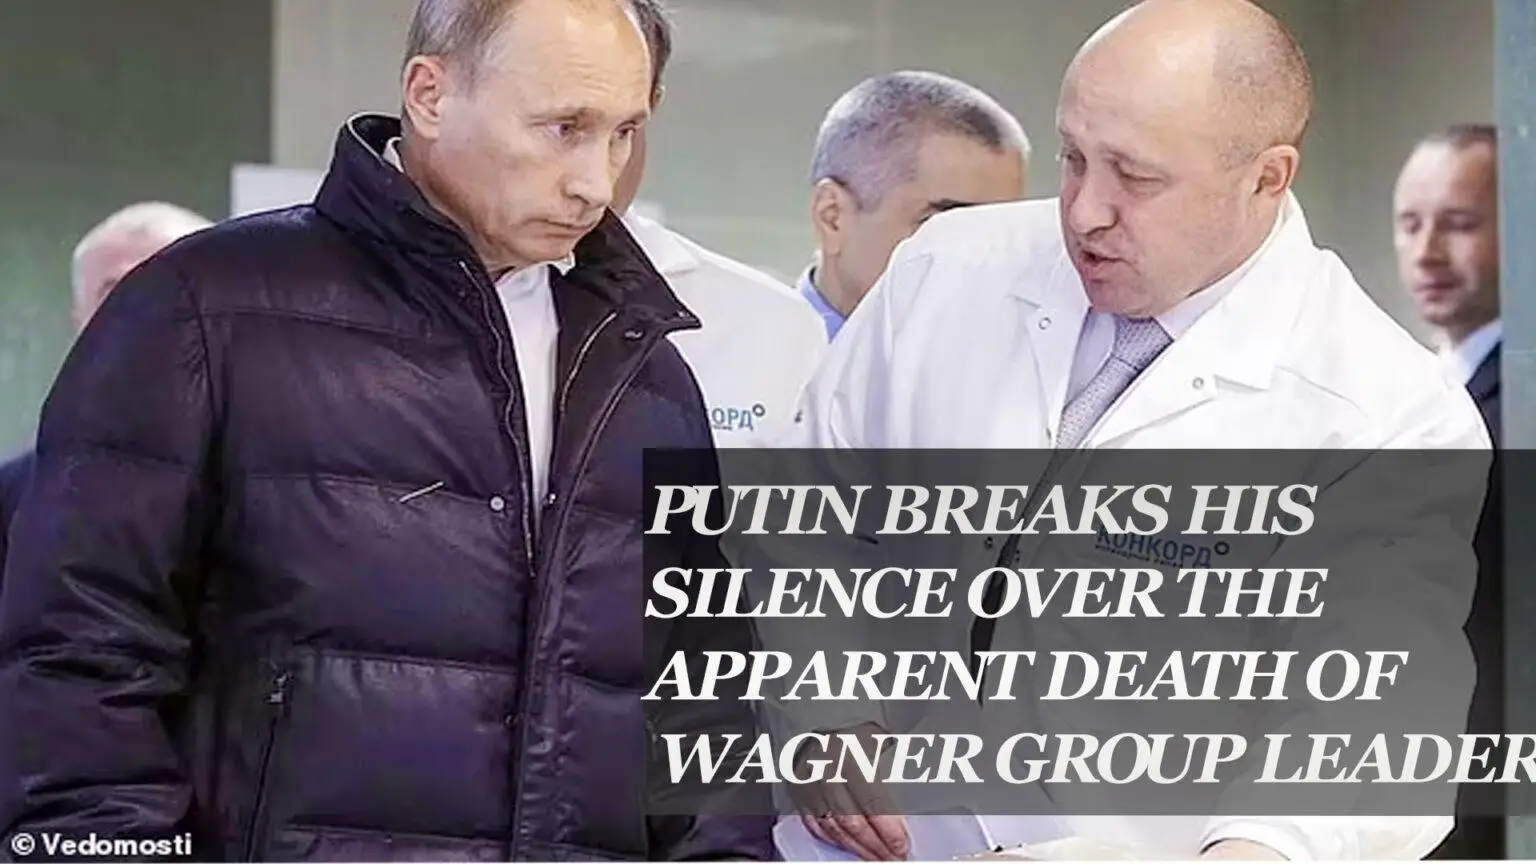 Putin Breaks Silence on Alleged Demise of Wagner Group Leader: A Global Security Shake-Up